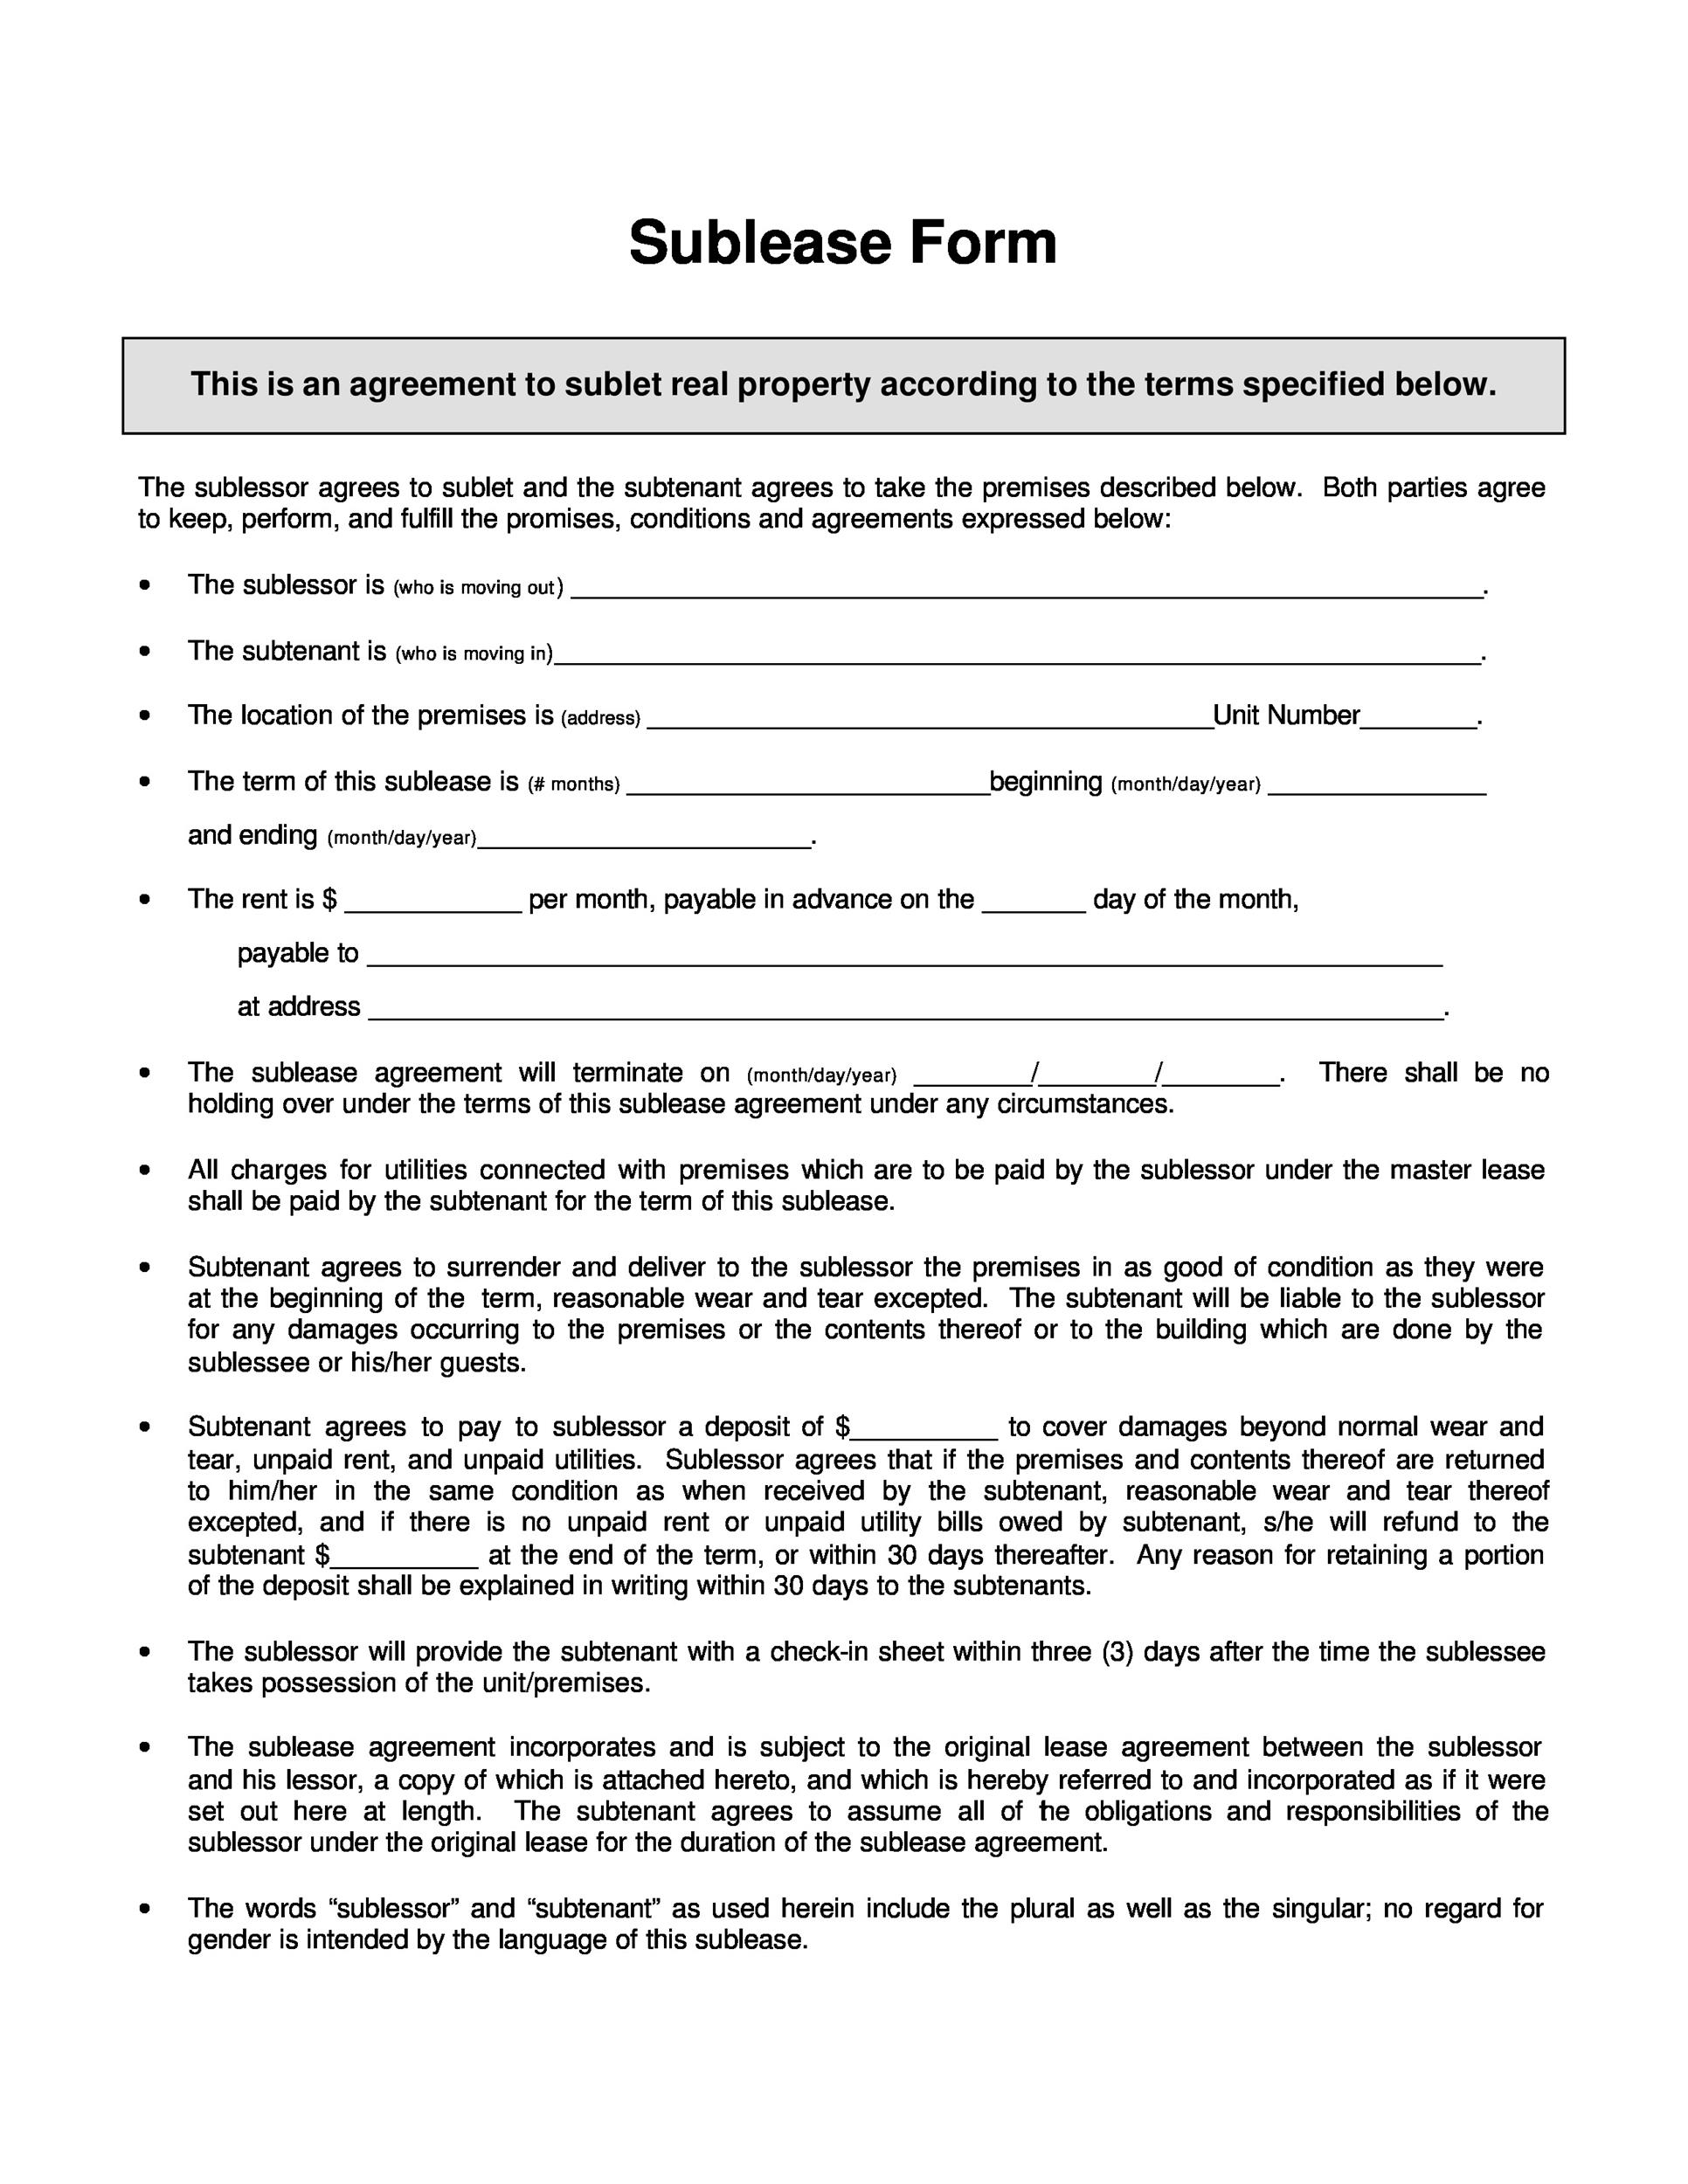 40+ Professional Sublease Agreement Templates \u0026 Forms  Template Lab